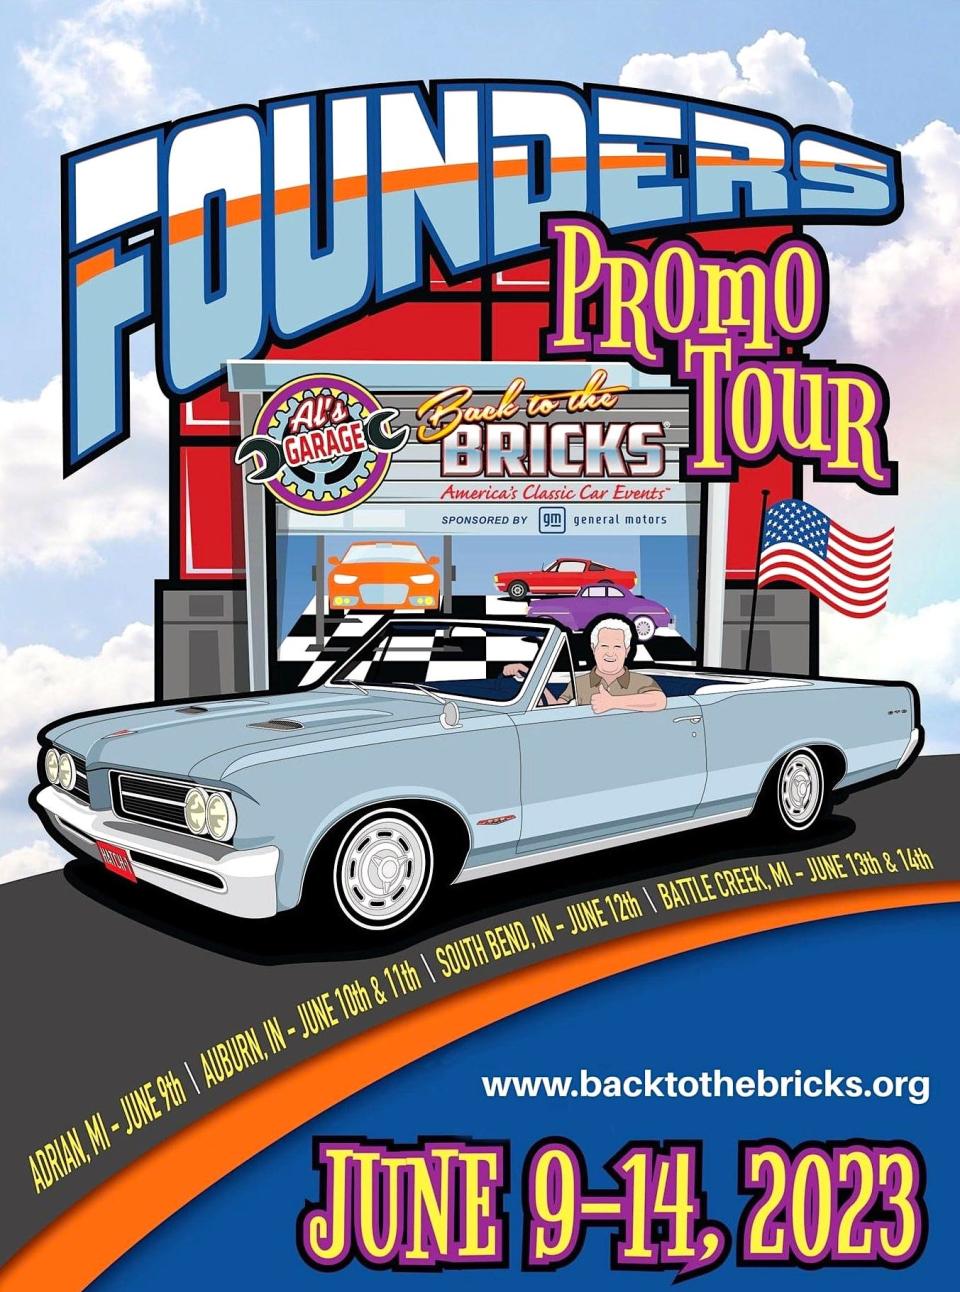 This promotional flyer details information pertinent to the 2023 Back the Bricks Founders Promo Tour, a car show event that generates a following of 500,000 car enthusiasts each year. The 2023 promo tour is June 9-14 and begins Friday, June 9, in Adrian. Other car show locations are in Battle Creek and in Indiana.